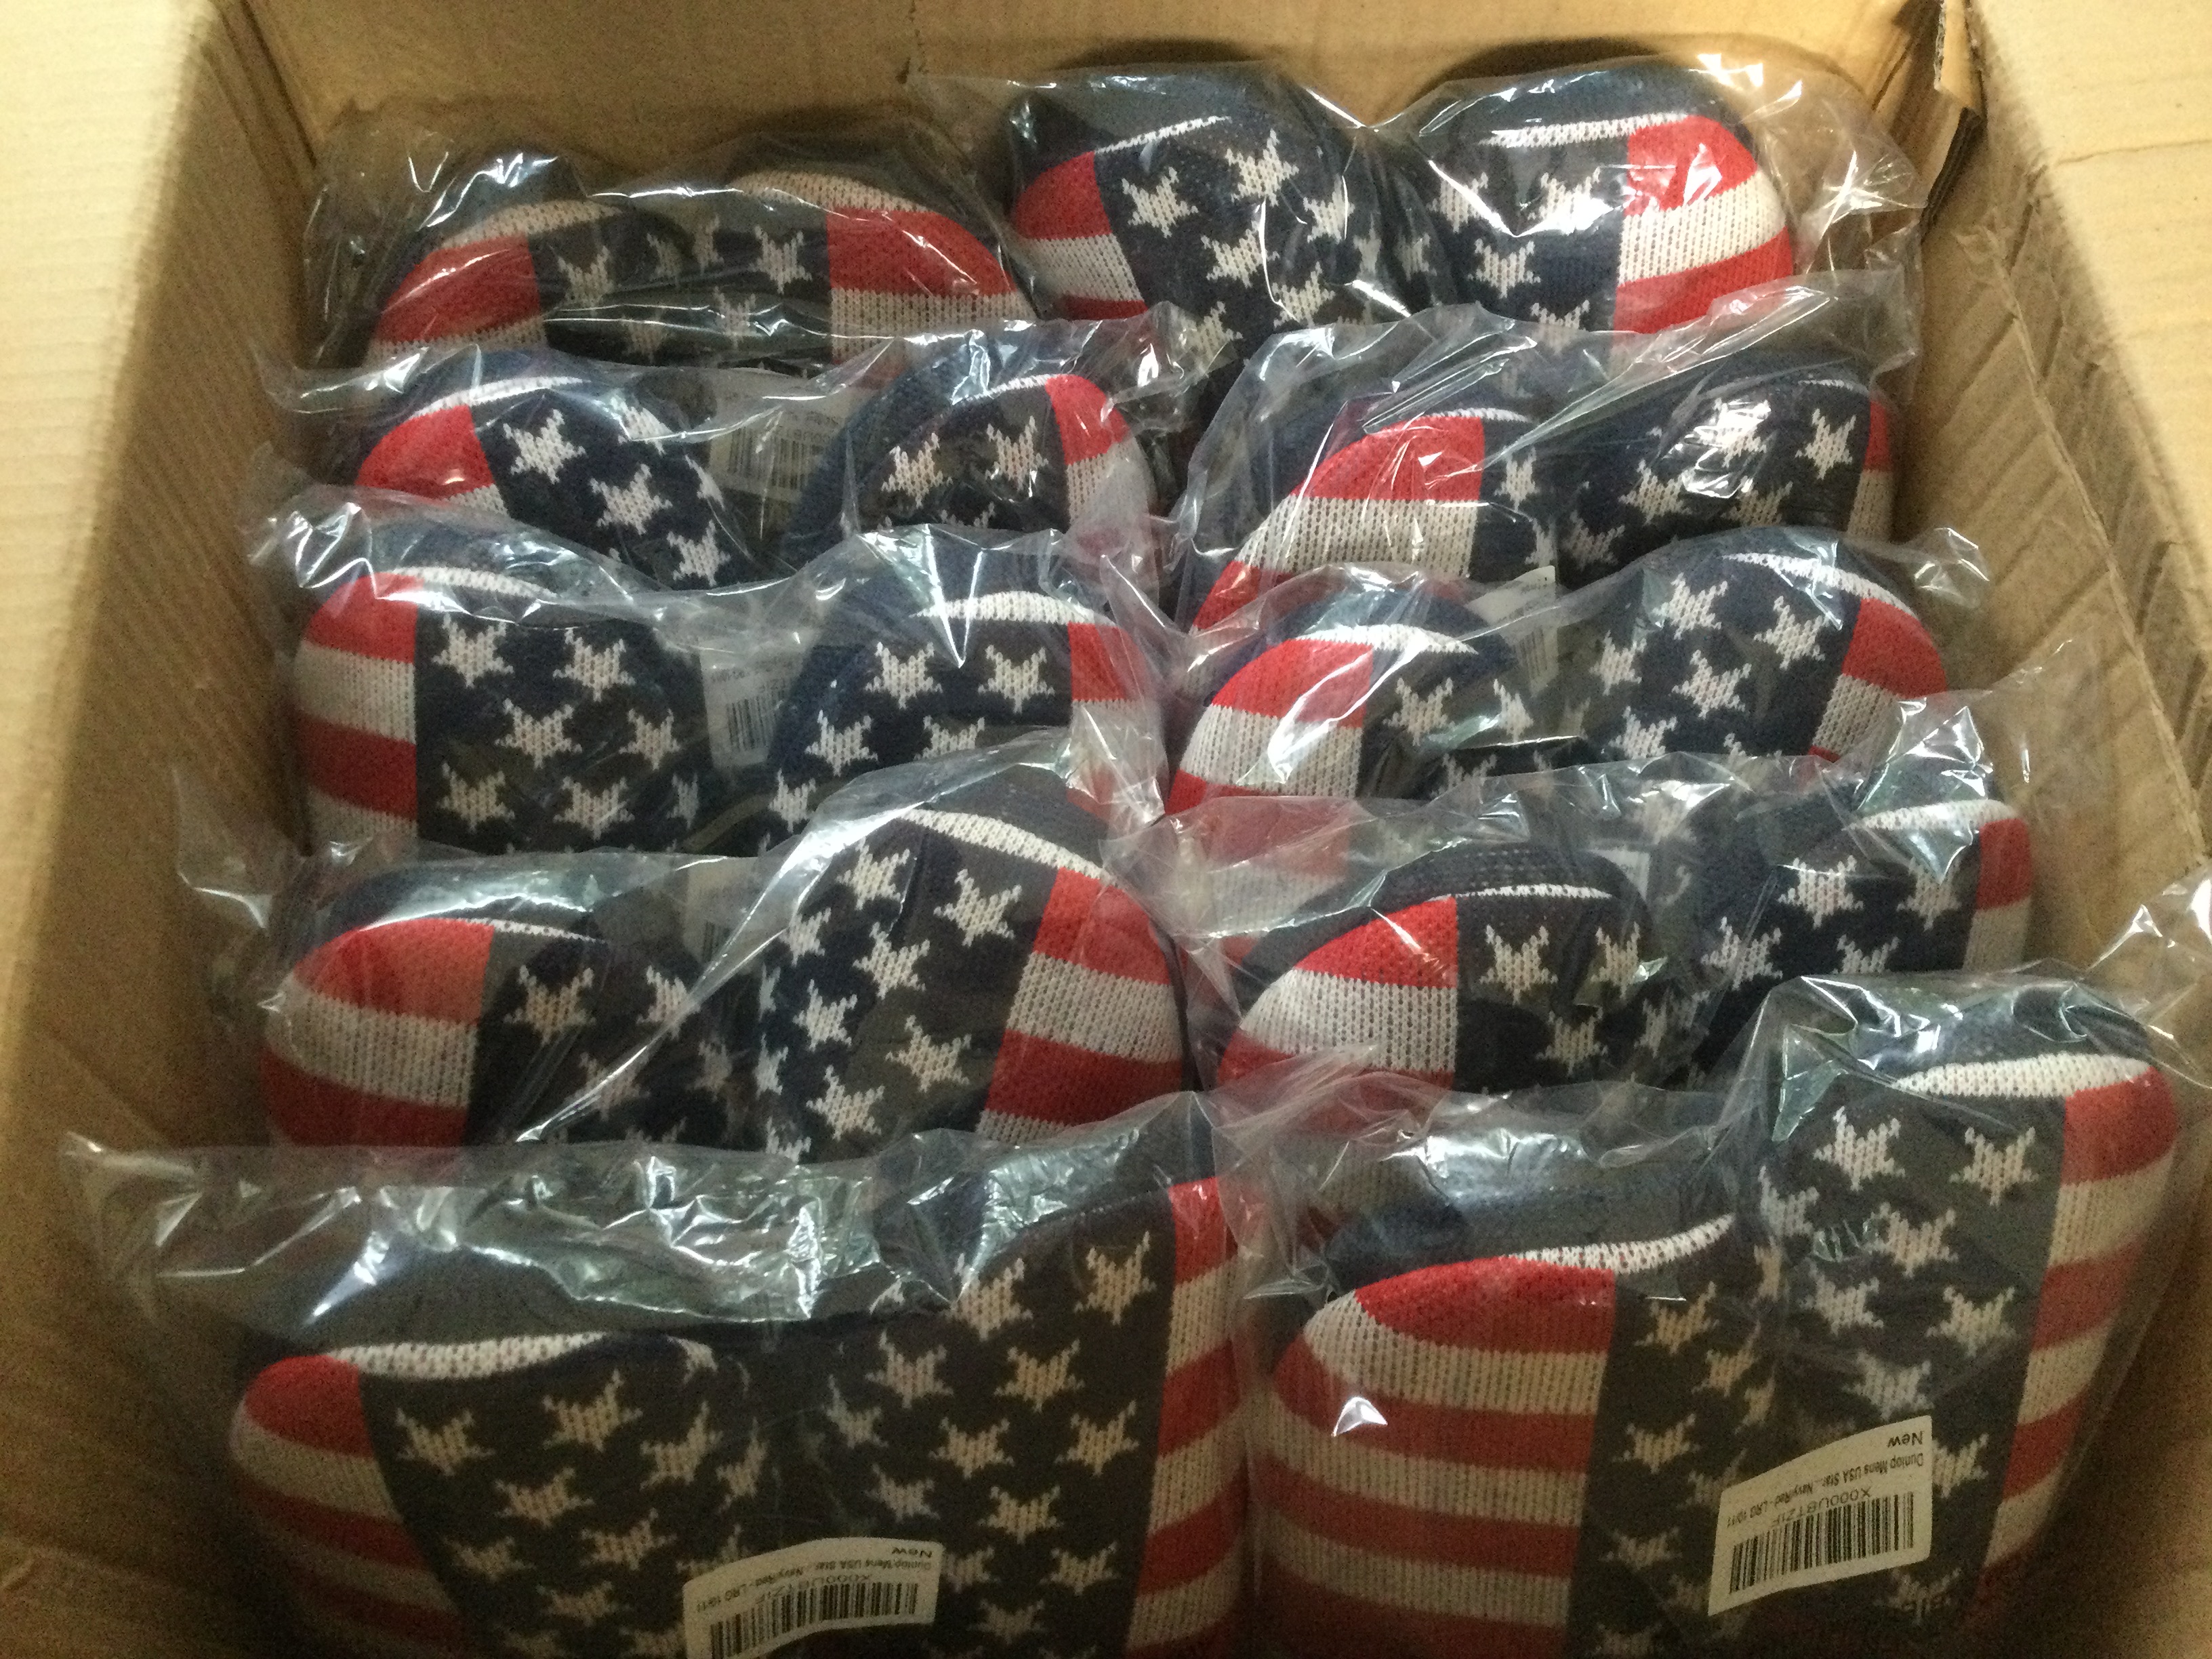 Job Lot 10 x Pairs Men's Dunlop, “USA Stars and Stripes” Memory Foam, Mule Slippers, Size L (10/1... - Image 5 of 7